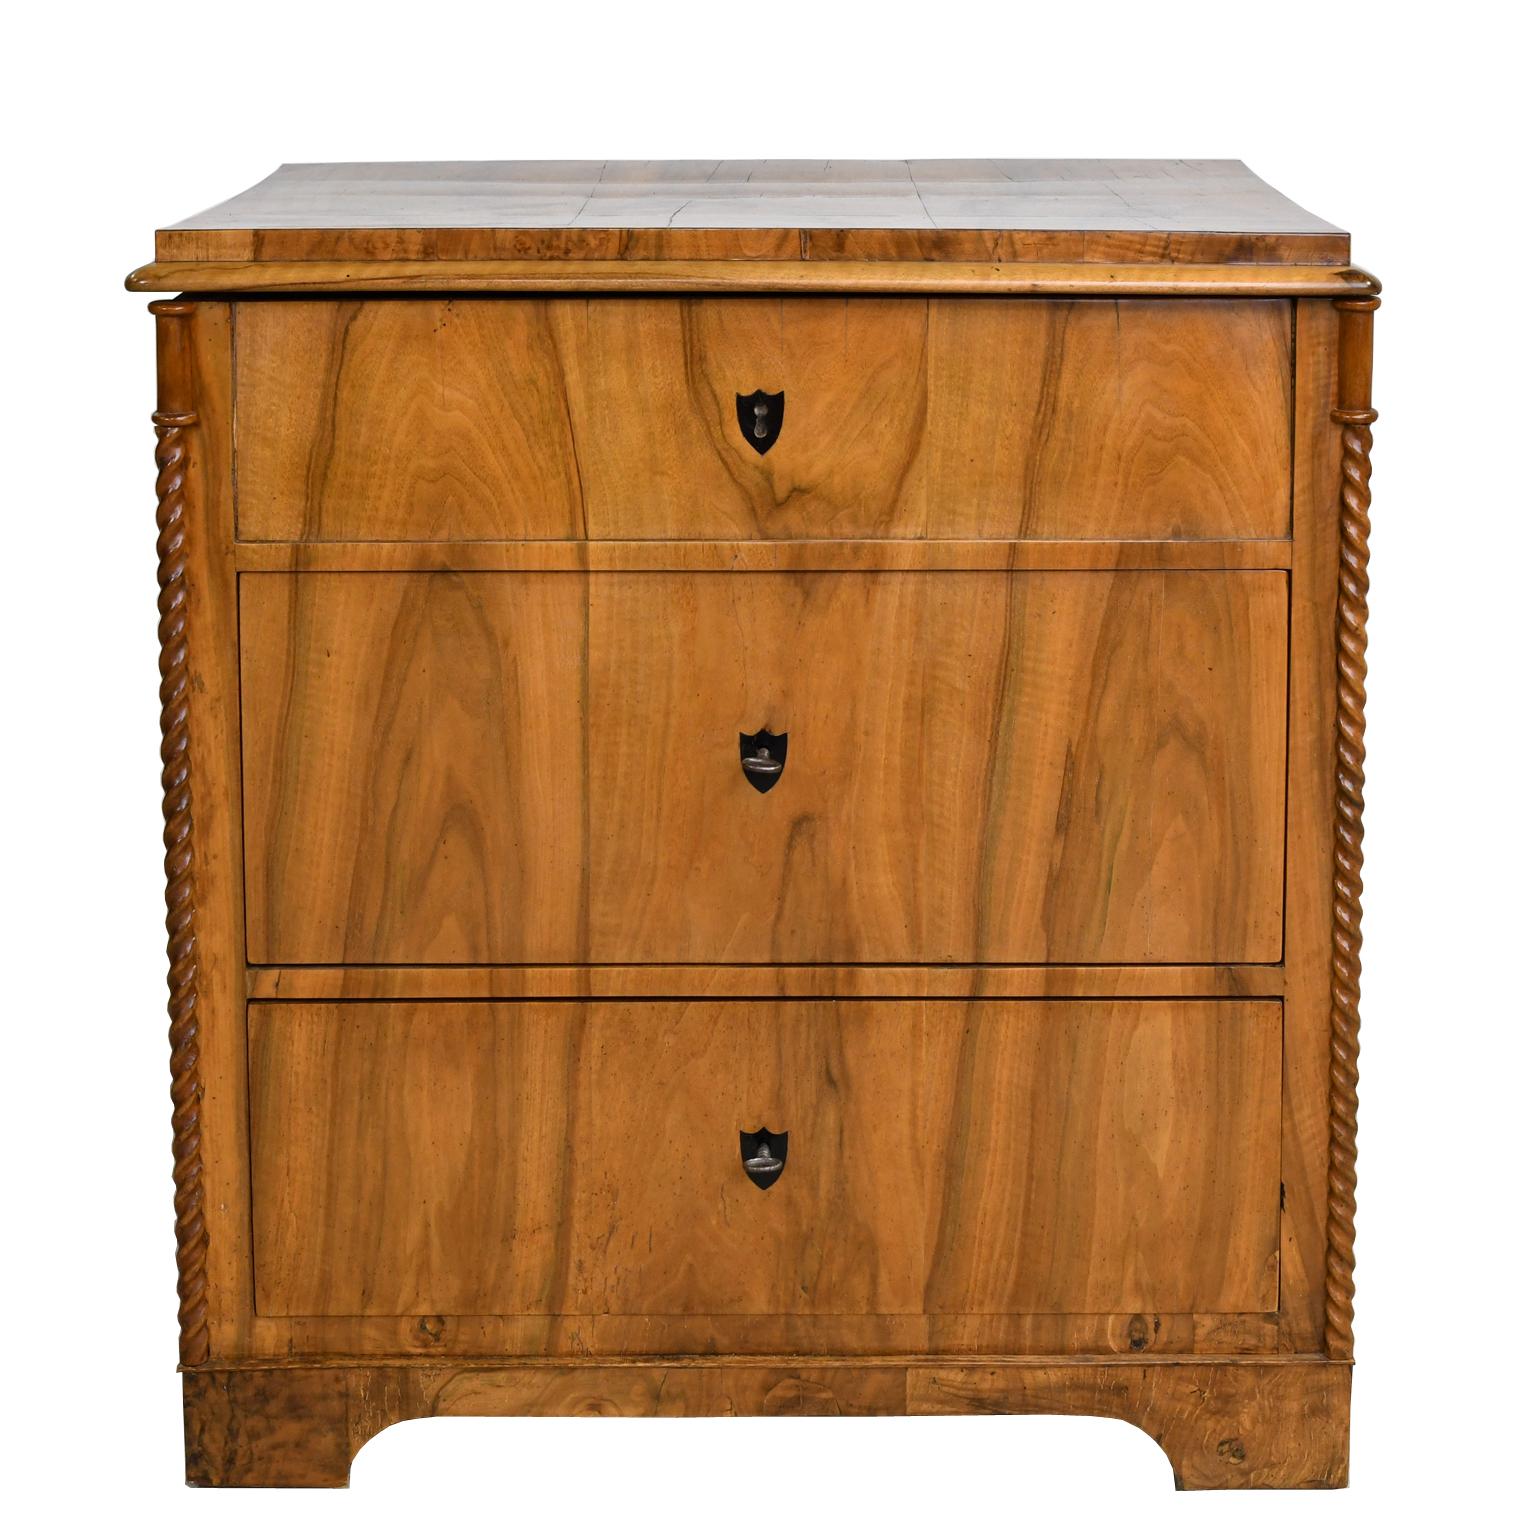 A small period North German Biedermeier chest in beautiful figured walnut with two drawers and a hinged lift-top. Chest has carved rope-turnings on the front corners, inlaid ebony key escutcheons, and rests on bracket feet. Northern Germany, circa